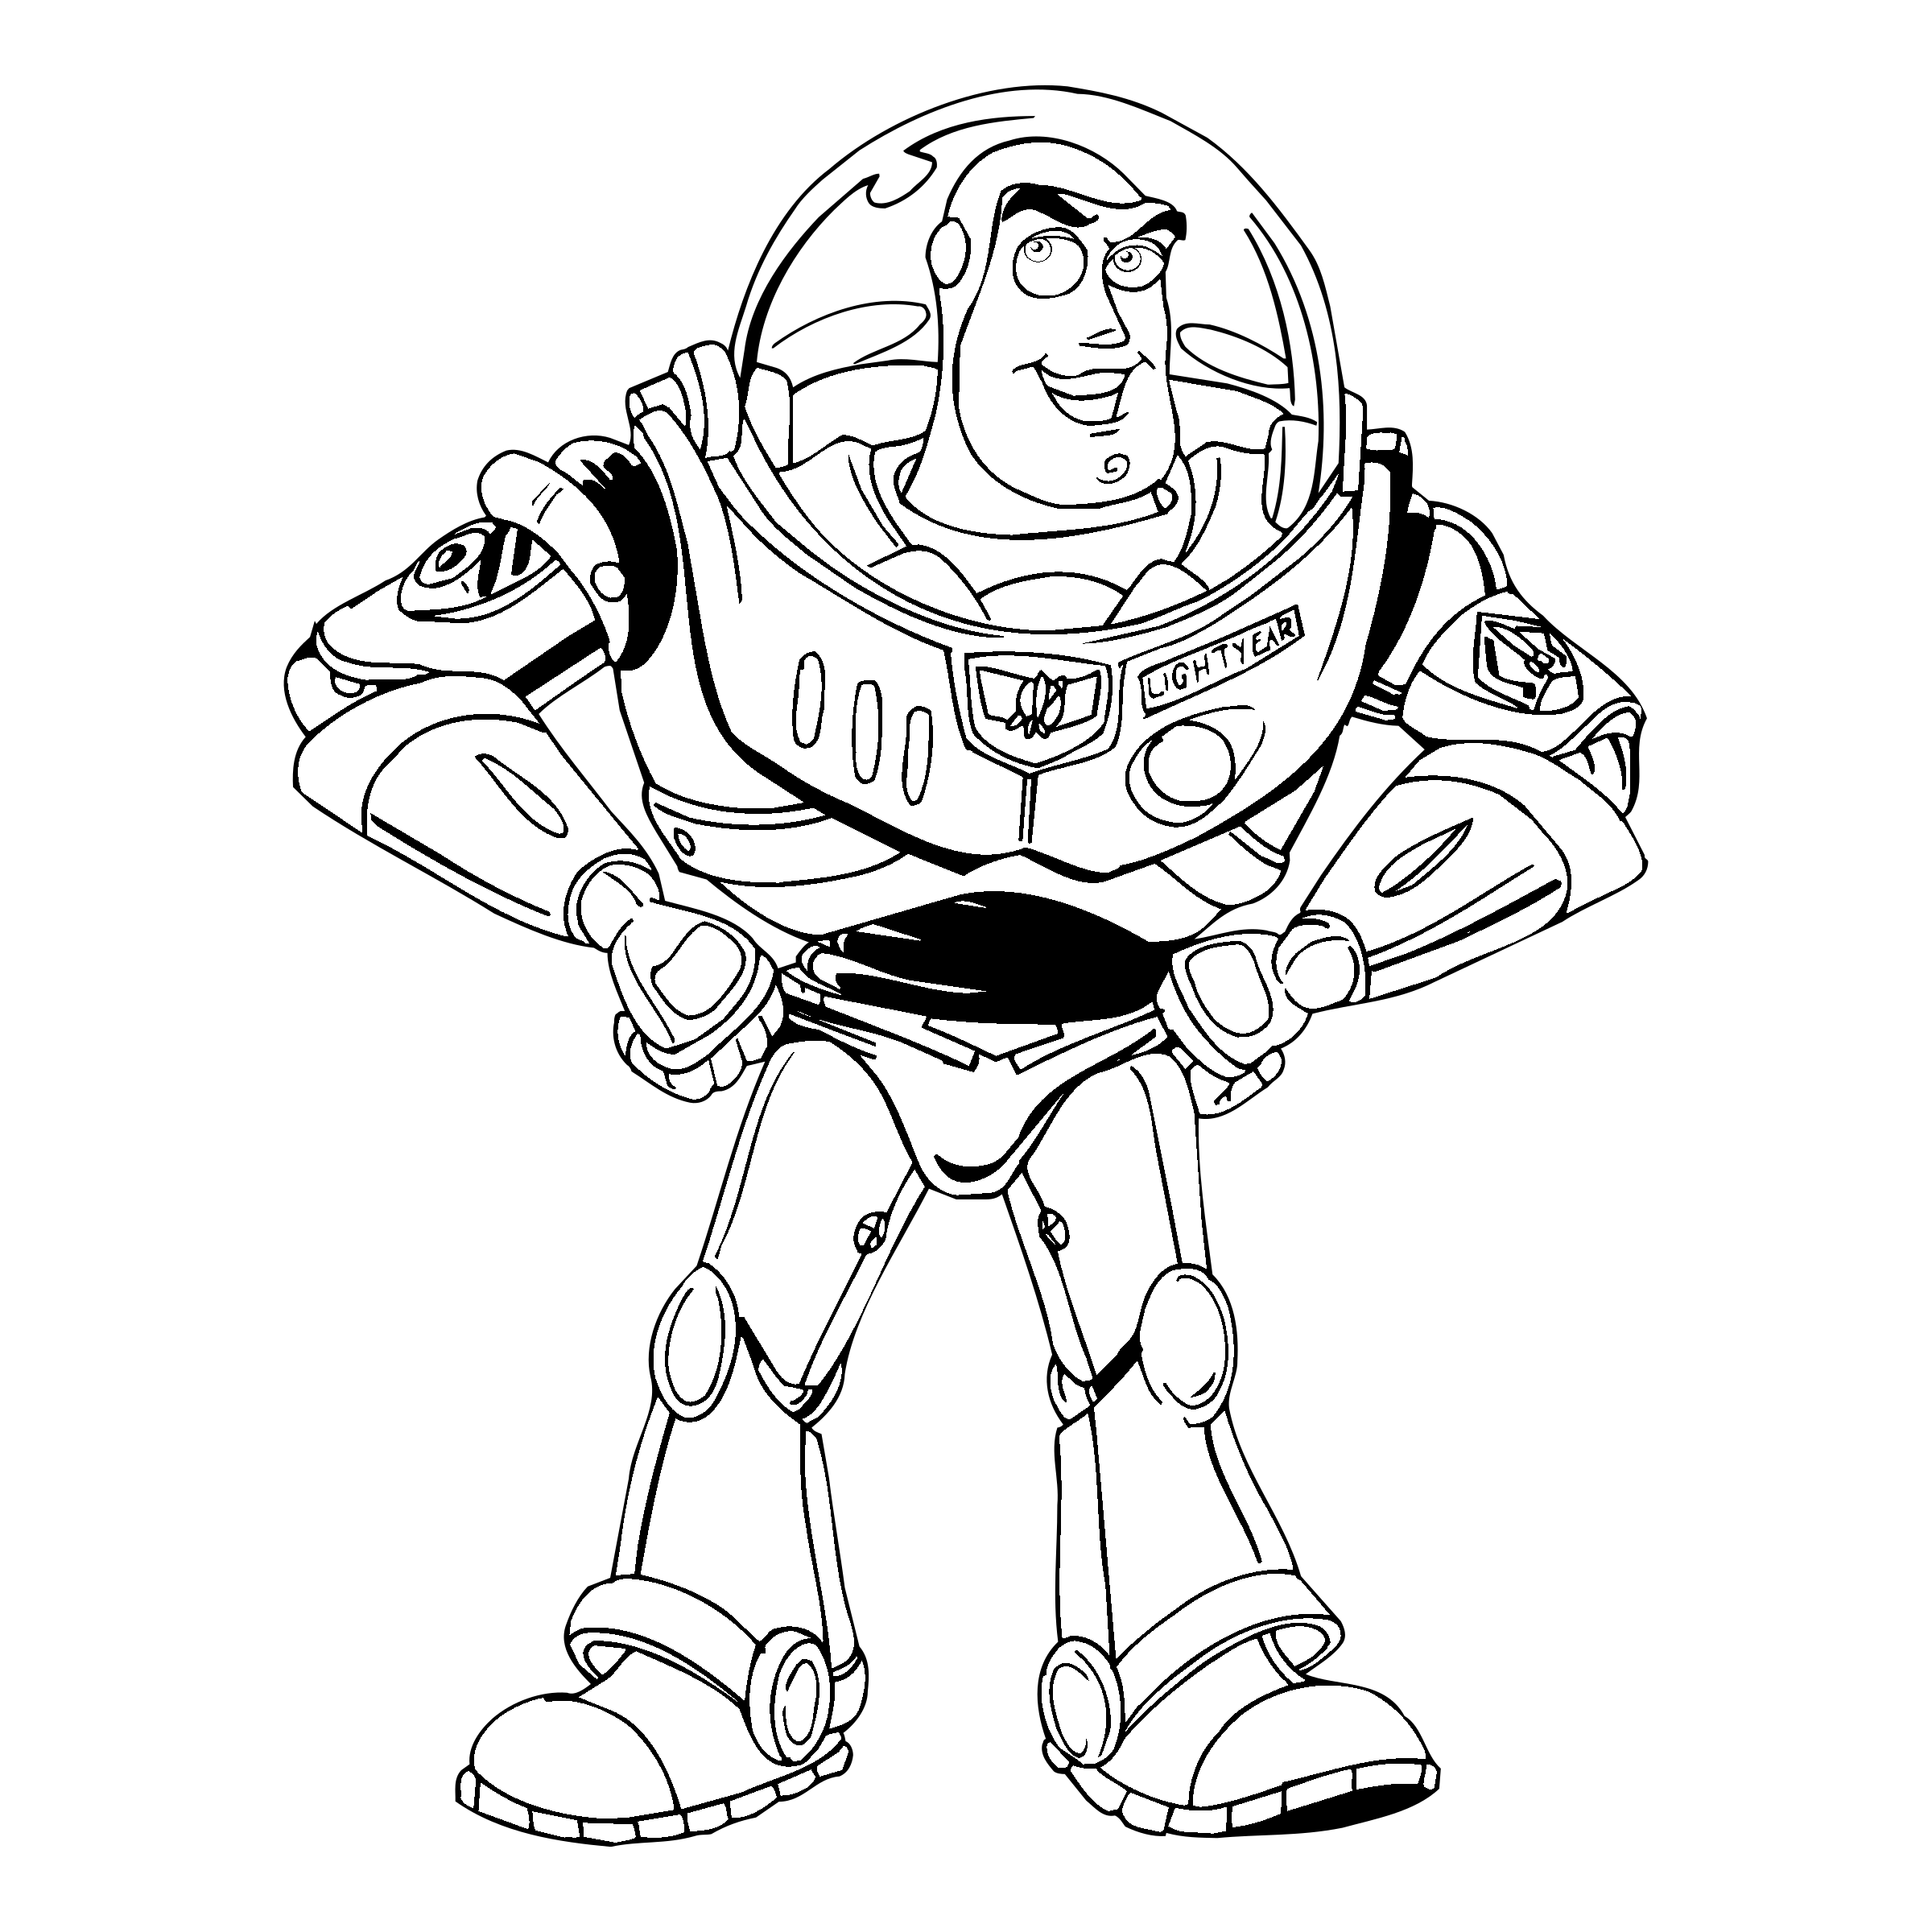 Vector Images for 'Buzz lightyear'. 